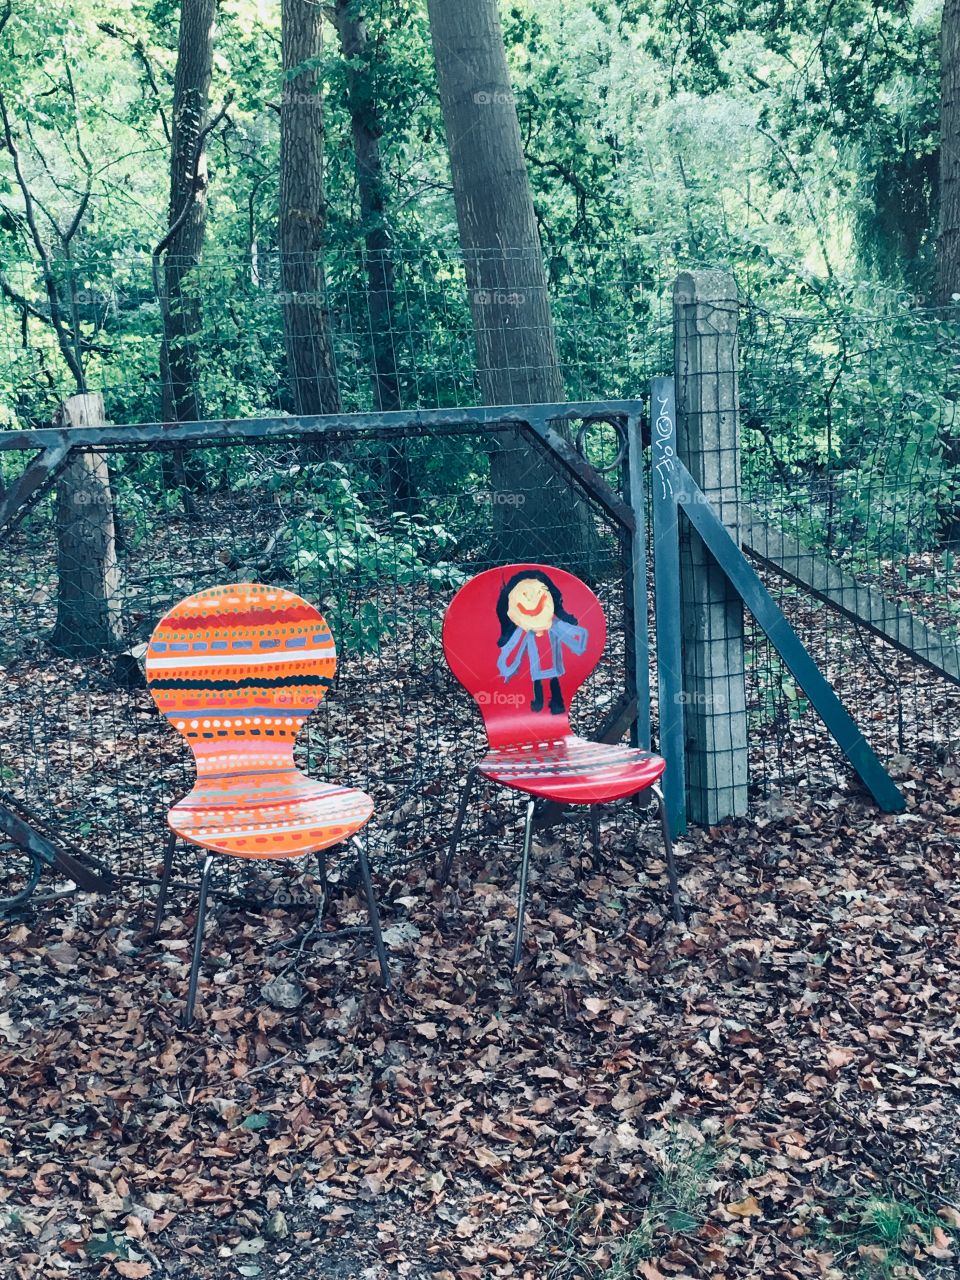 Creepy chairs in the middle of a forest